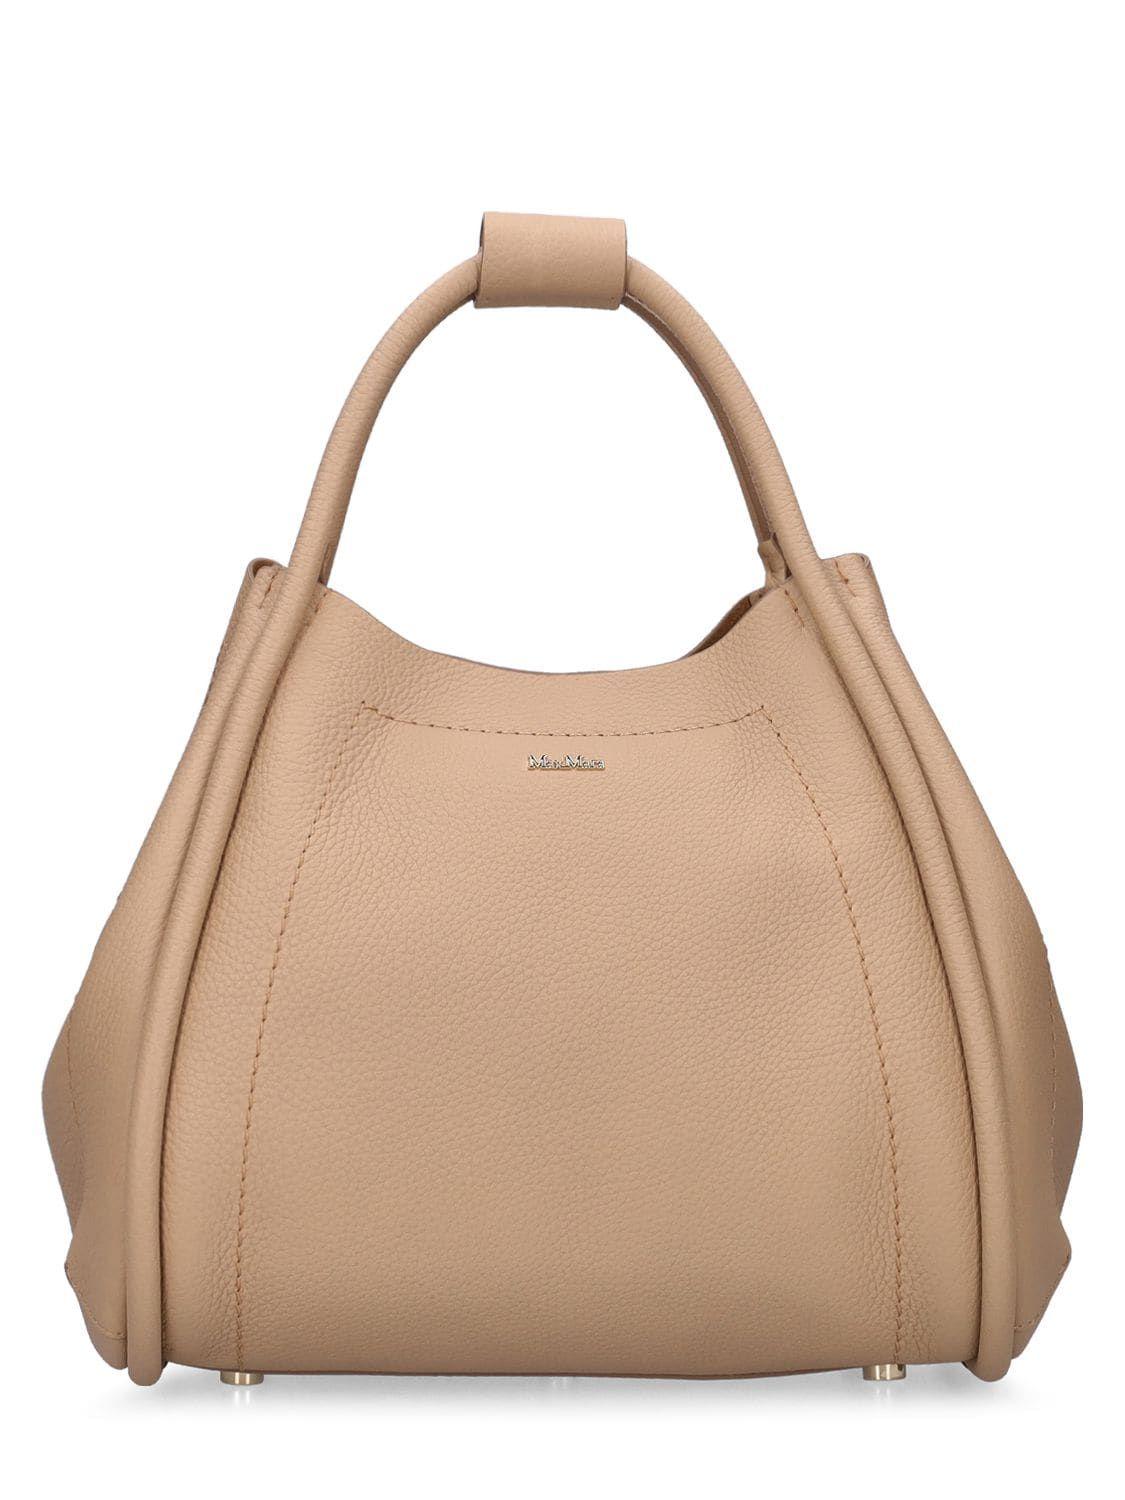 Max Mara Marinesdrumed Leather Tote Bag in Natural | Lyst